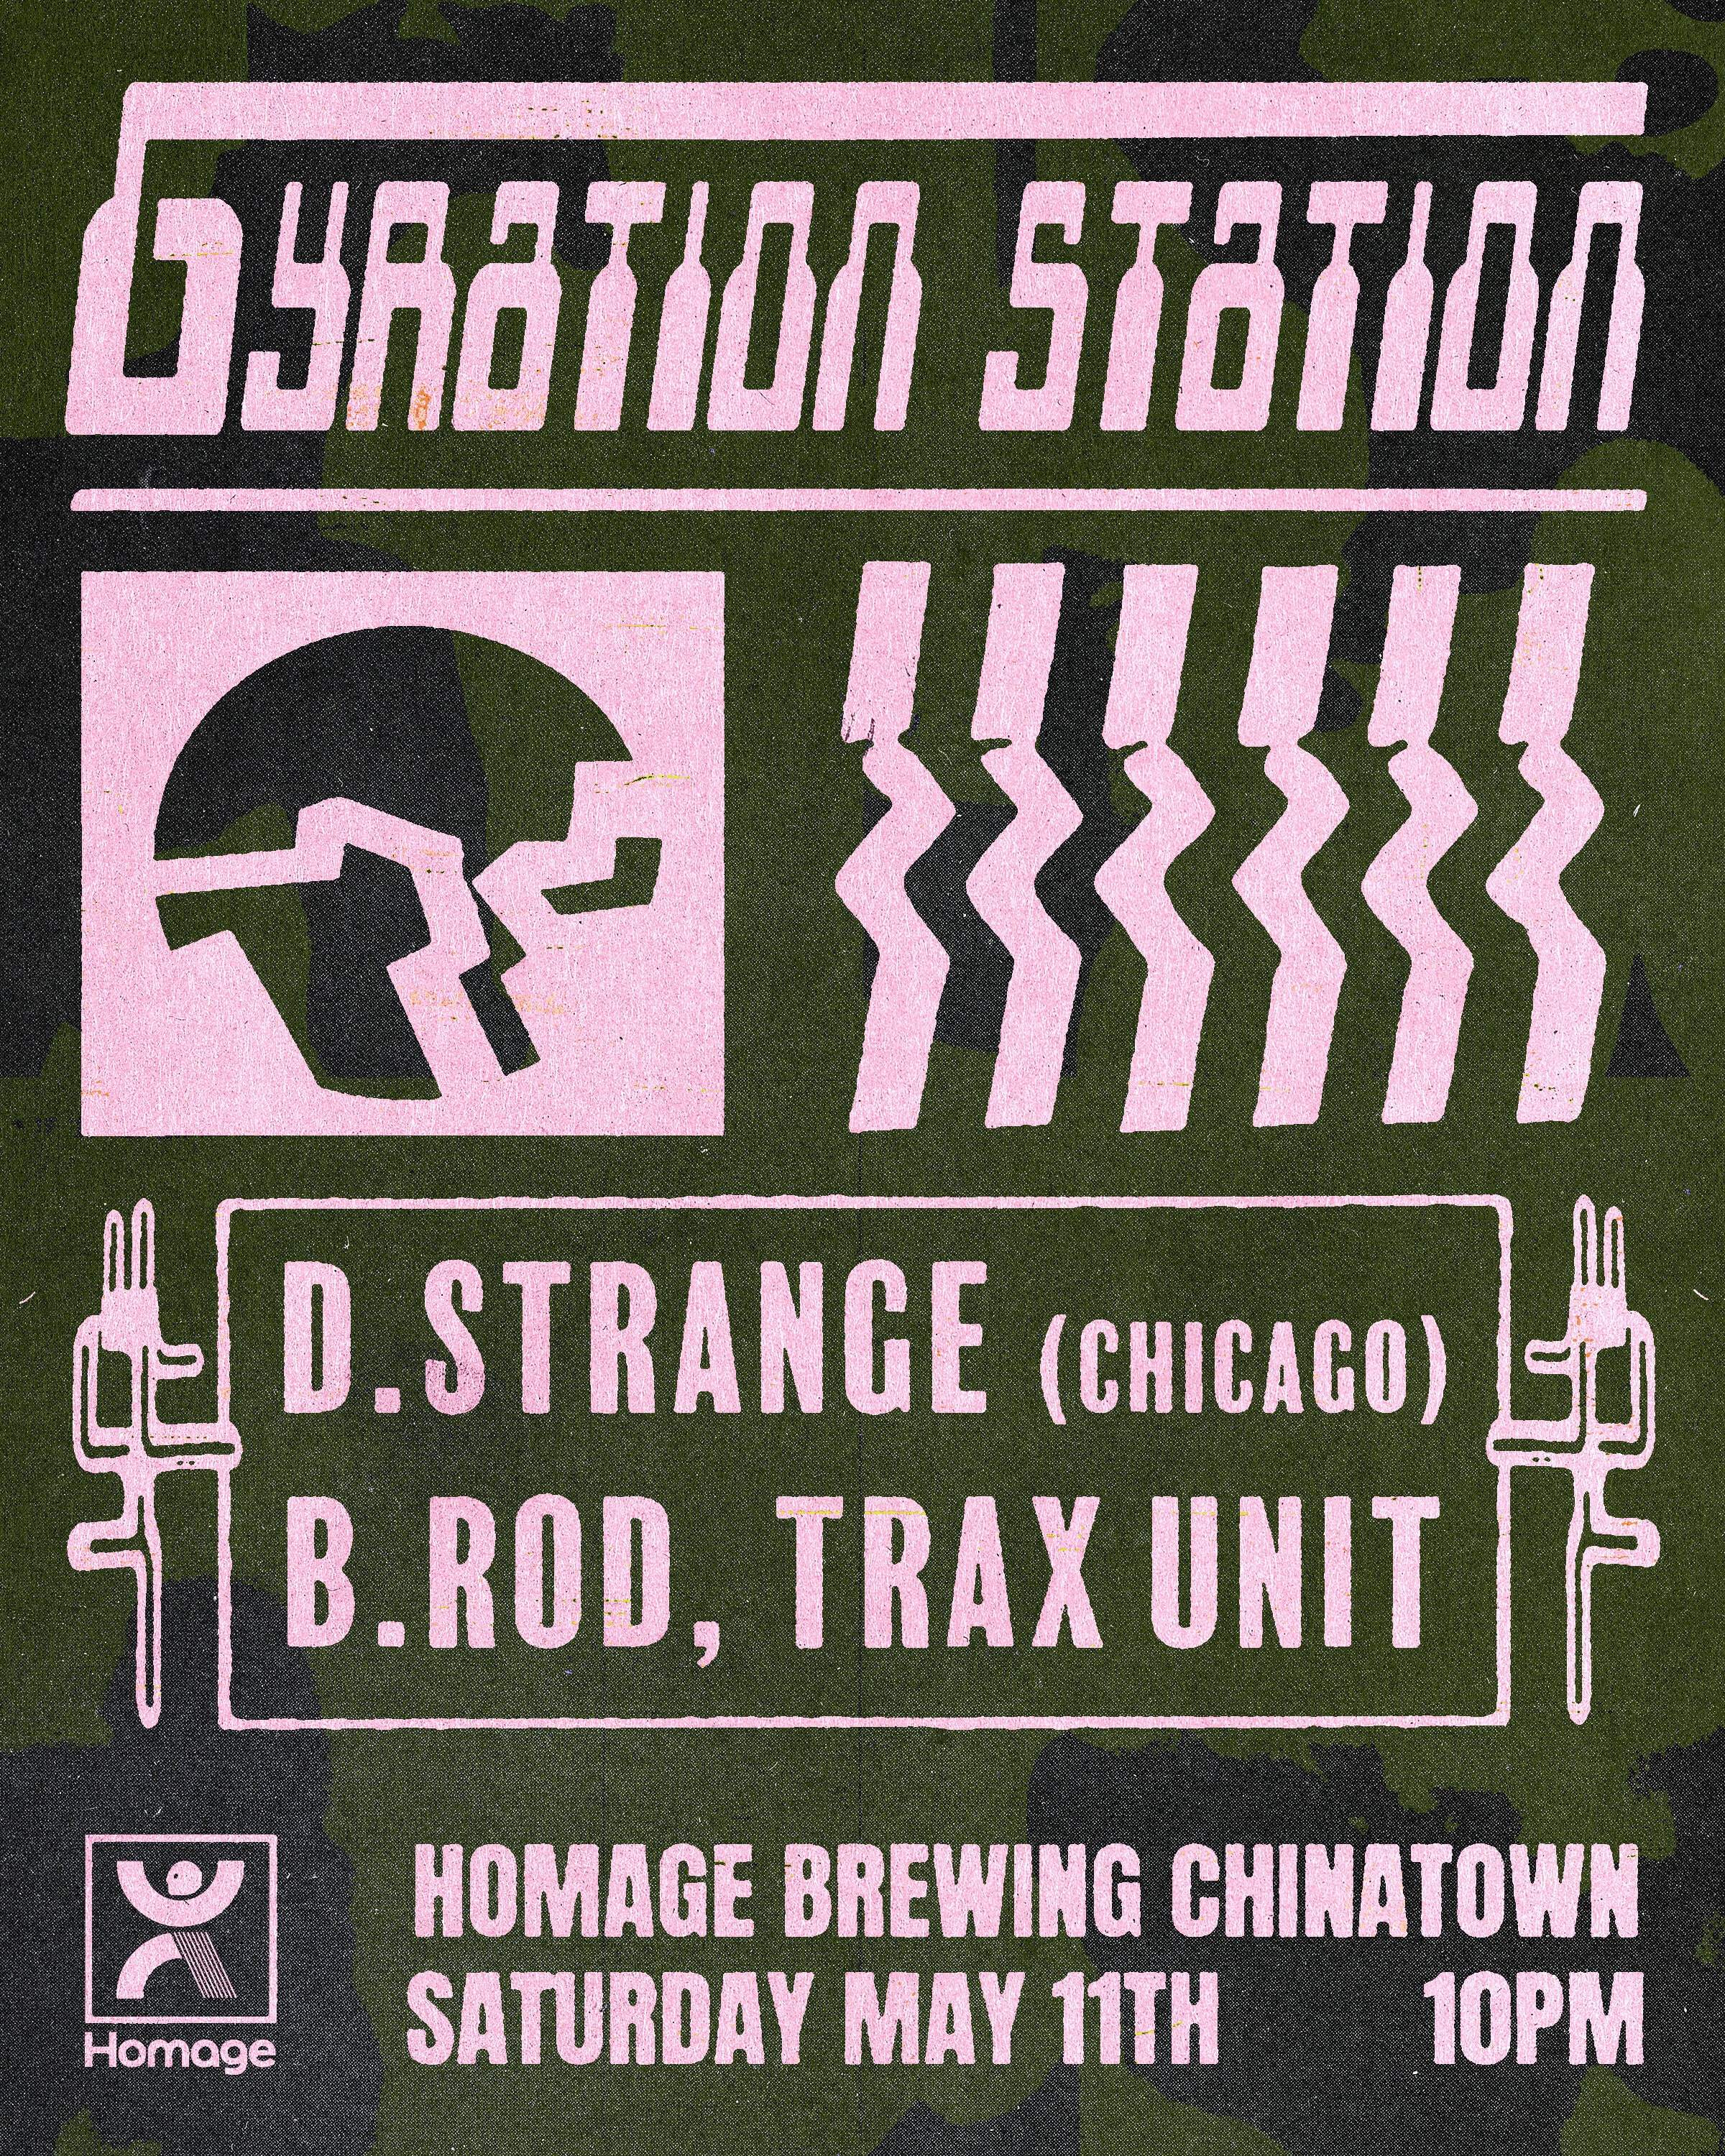 Gyration Station with D.Strange, B.Rod, and Trax Unit - フライヤー表